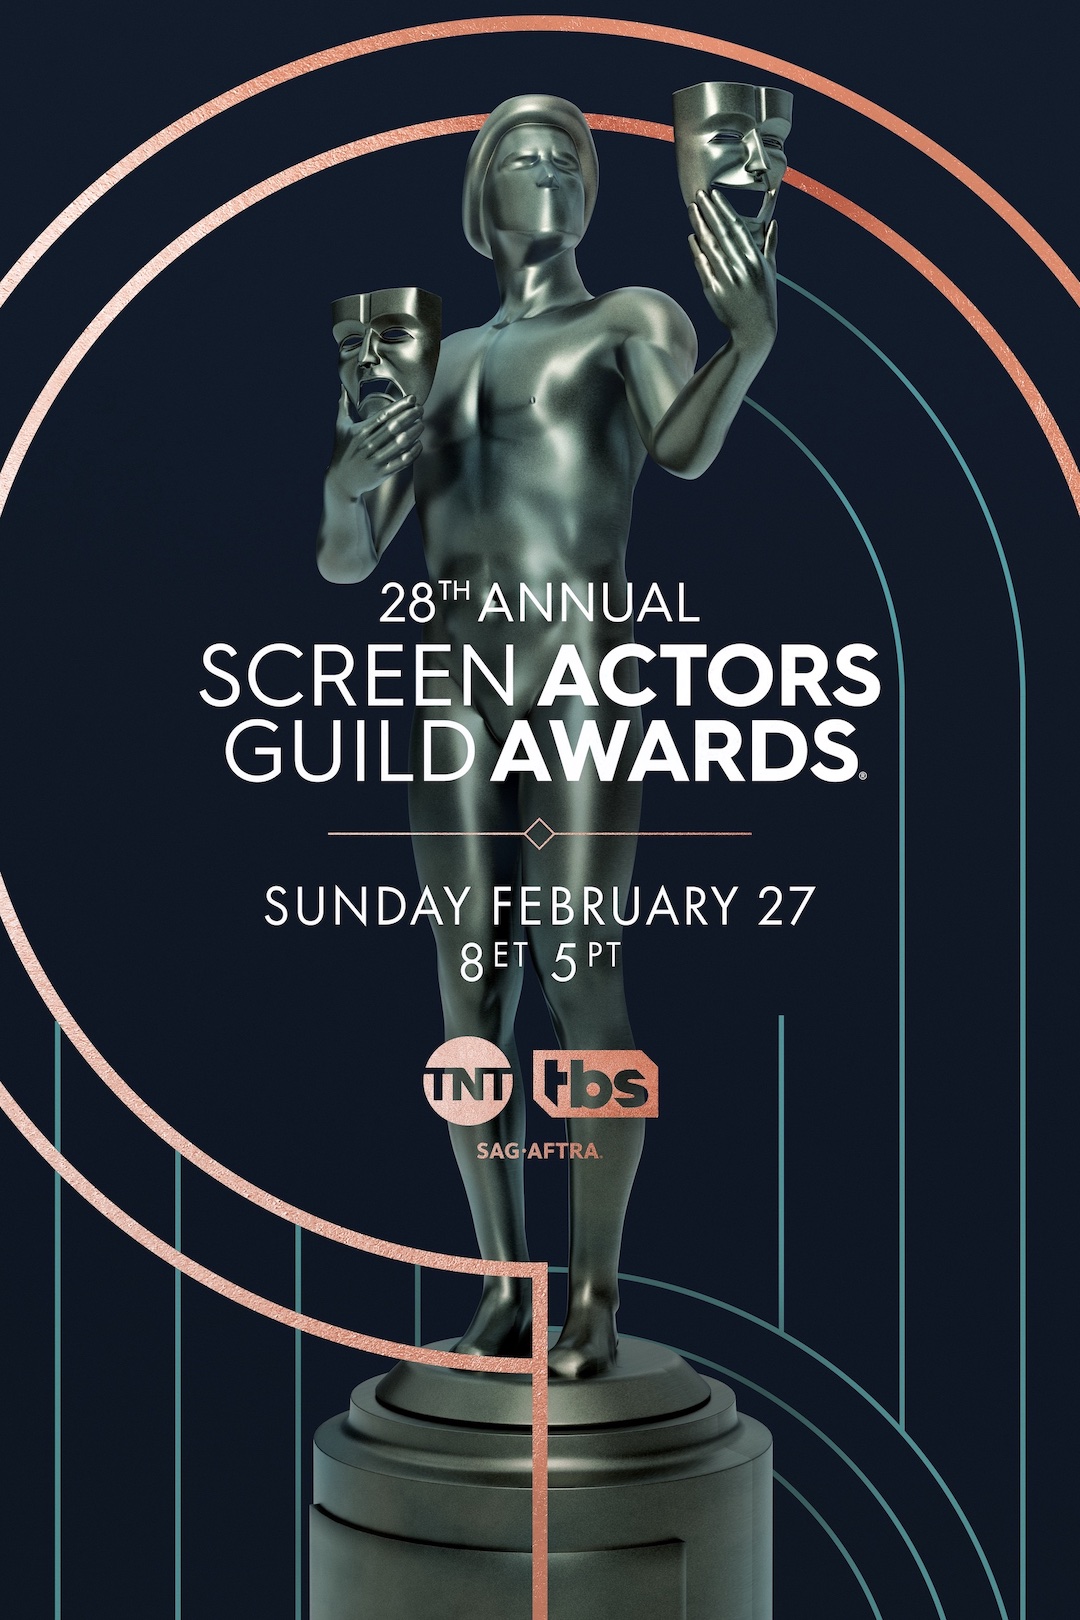 28th Annual Screen Actors Guild Awards ceremony key art courtesy of the SAG Awards.